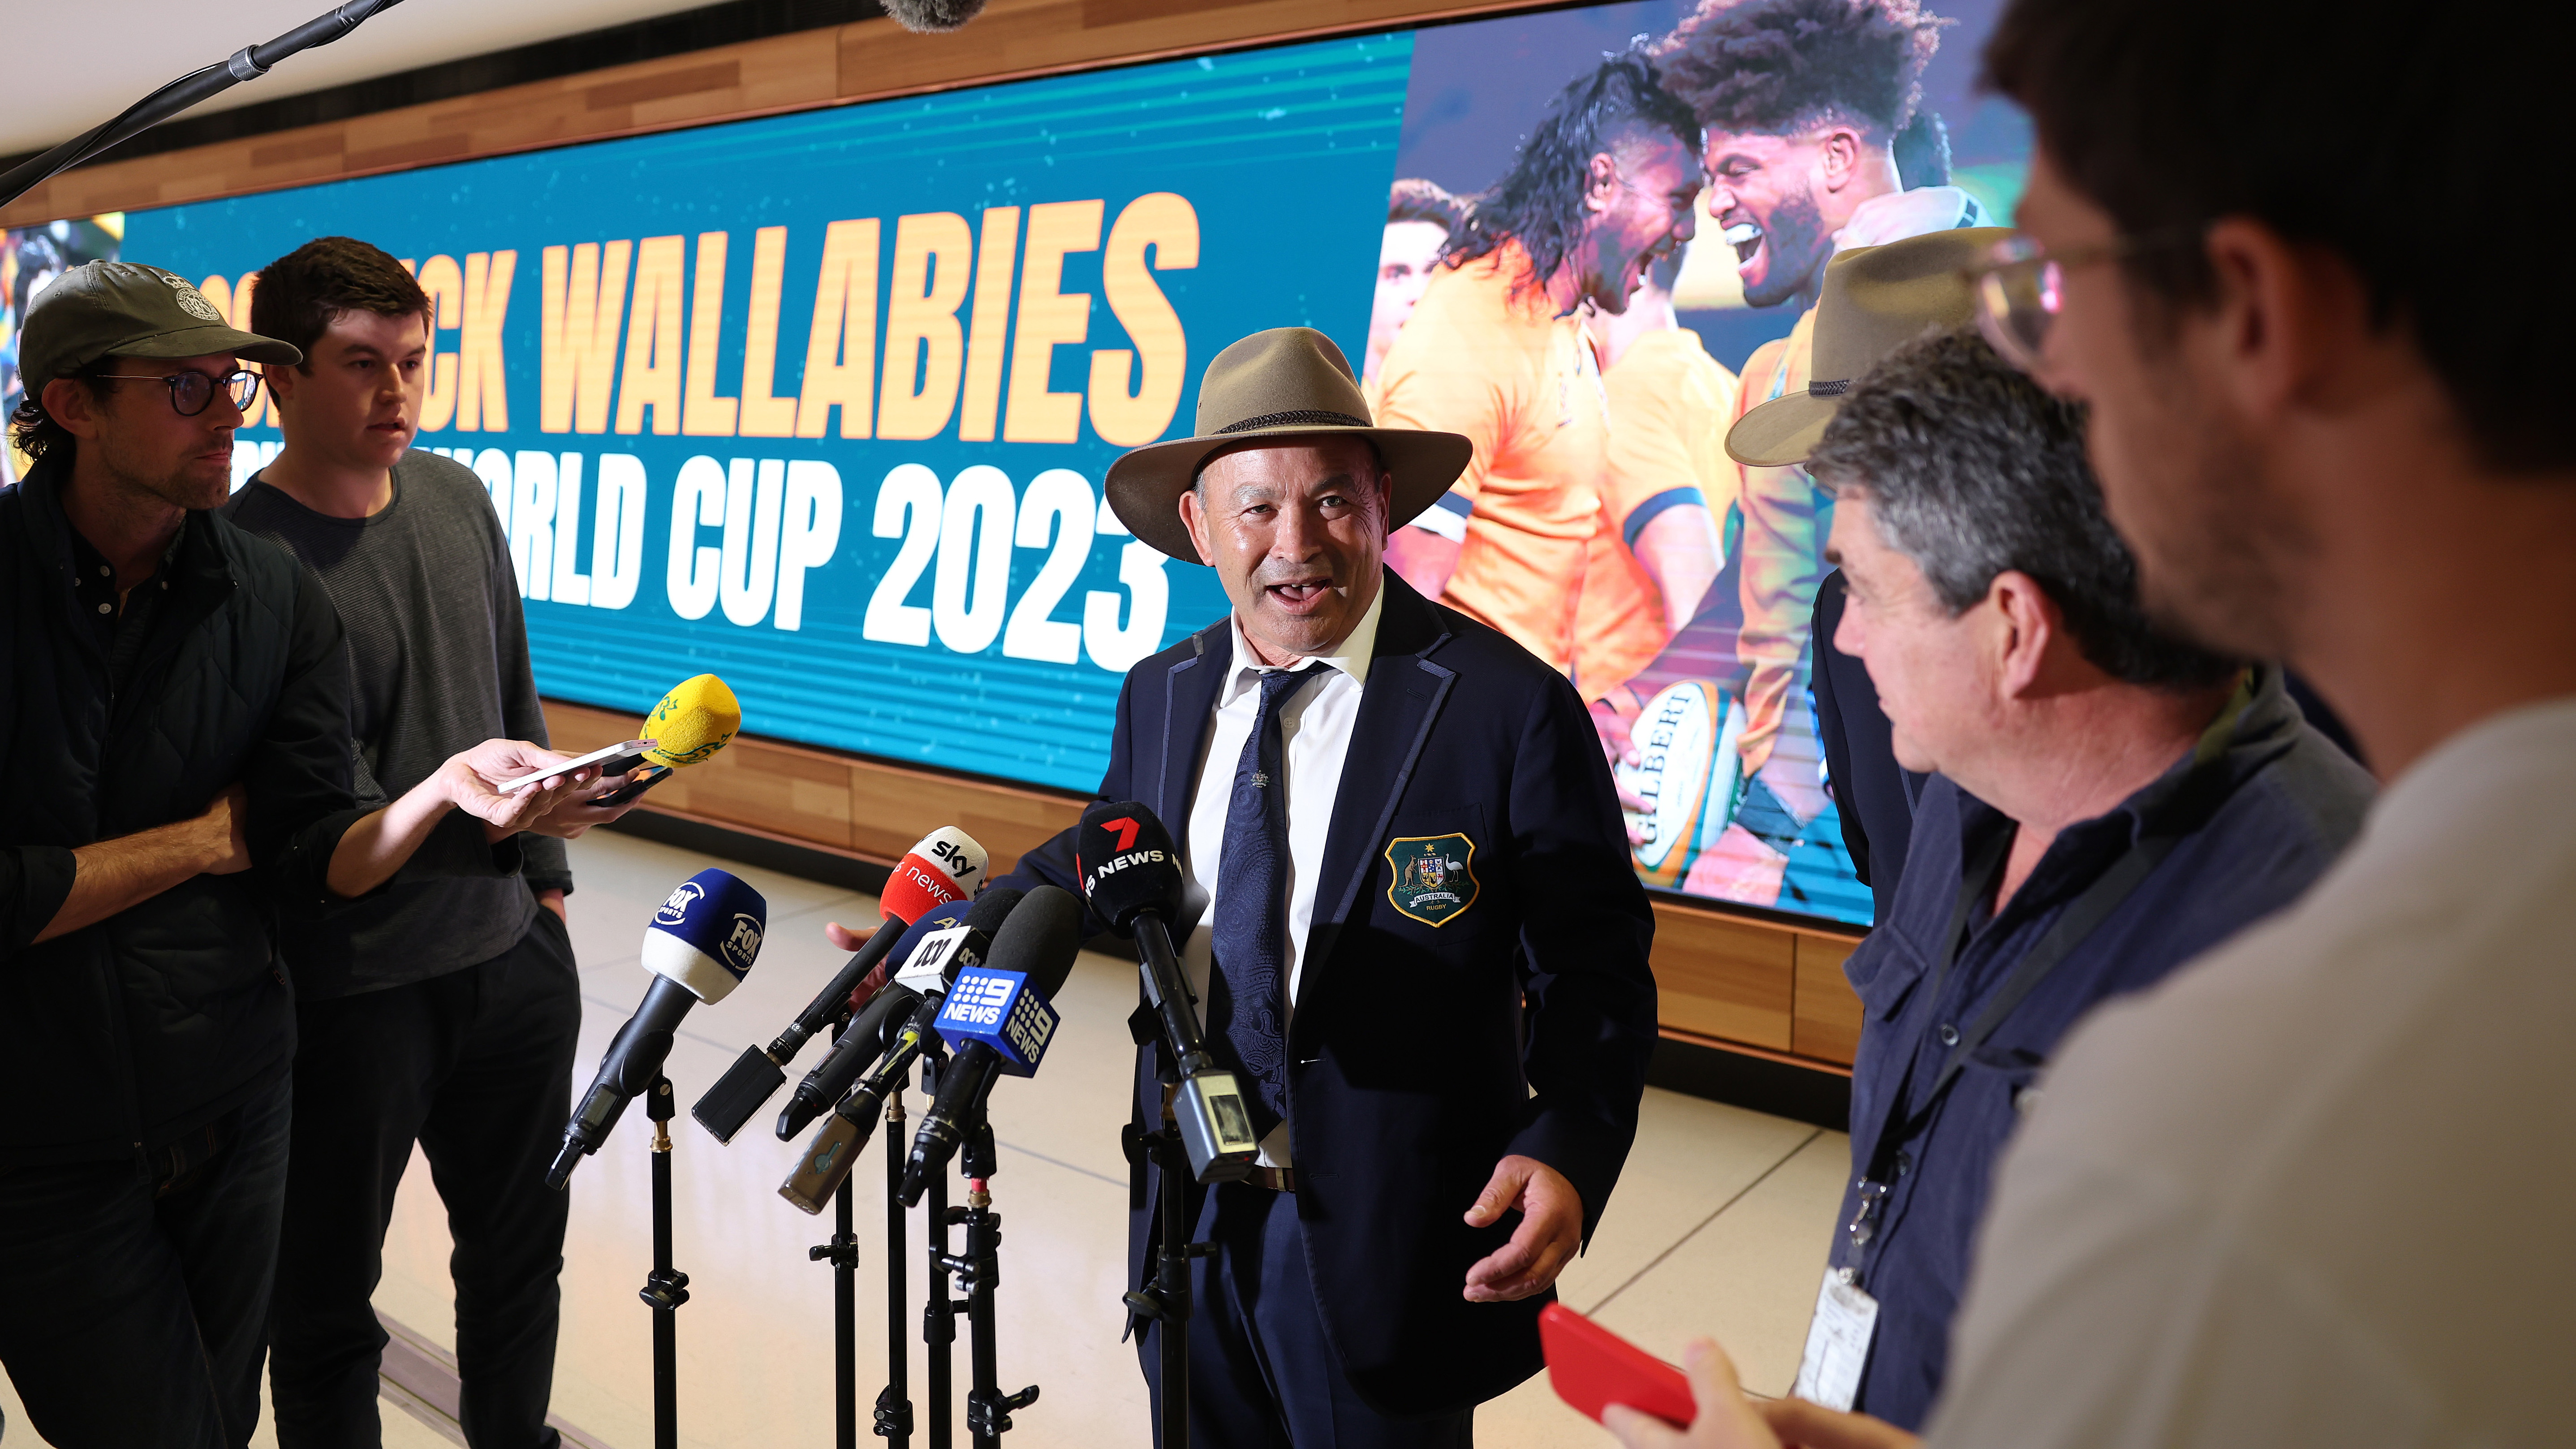 Eddie Jones Wallabies: New coach gives fans cause for hope in